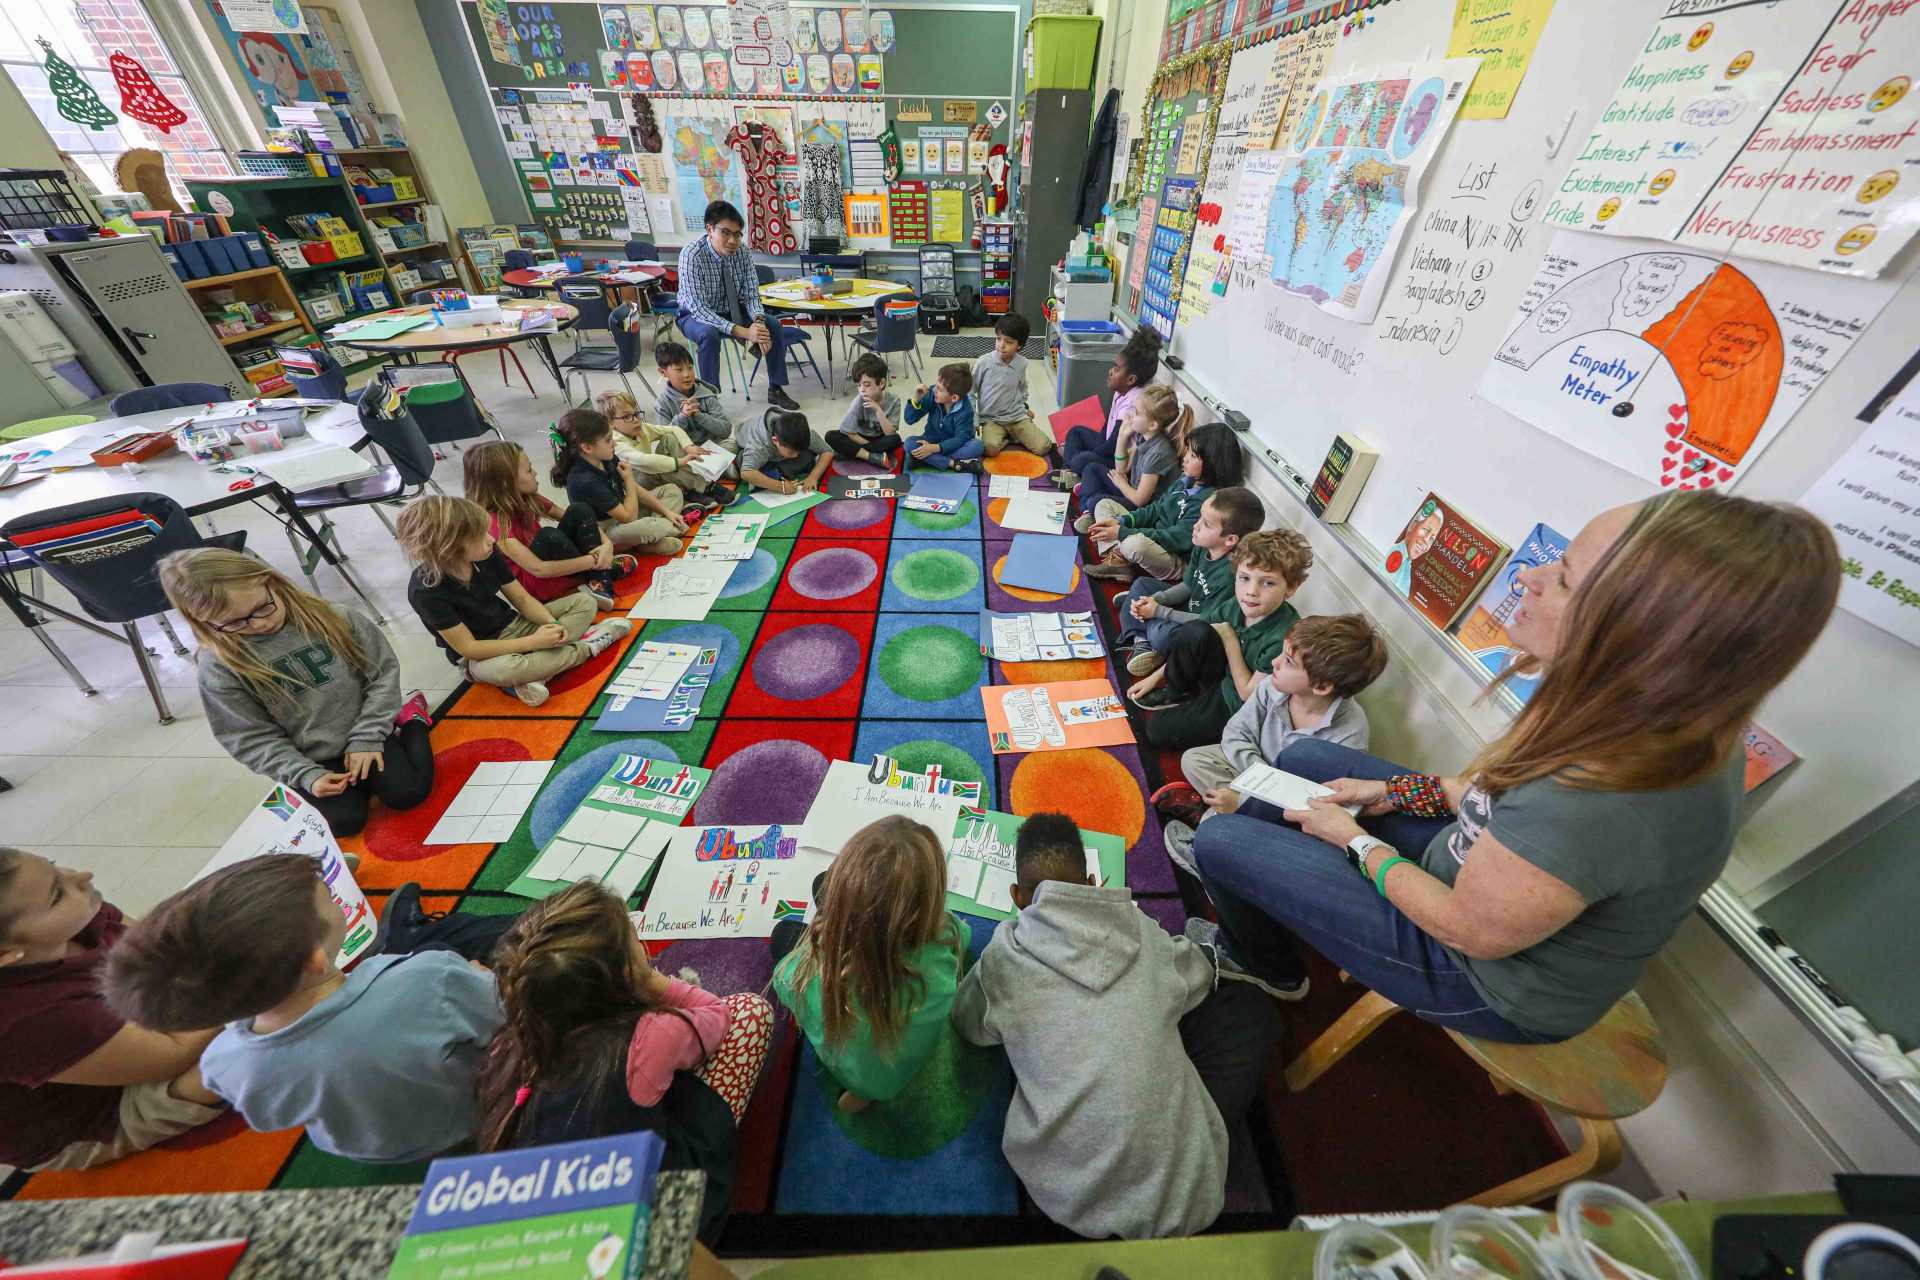 Schoolteacher Wendy Turner discusses with her students the topic of the day during a global awareness session Thursday, Dec. 12, 2019, at Mount Pleasant Elementary School in Wilmington, DE.